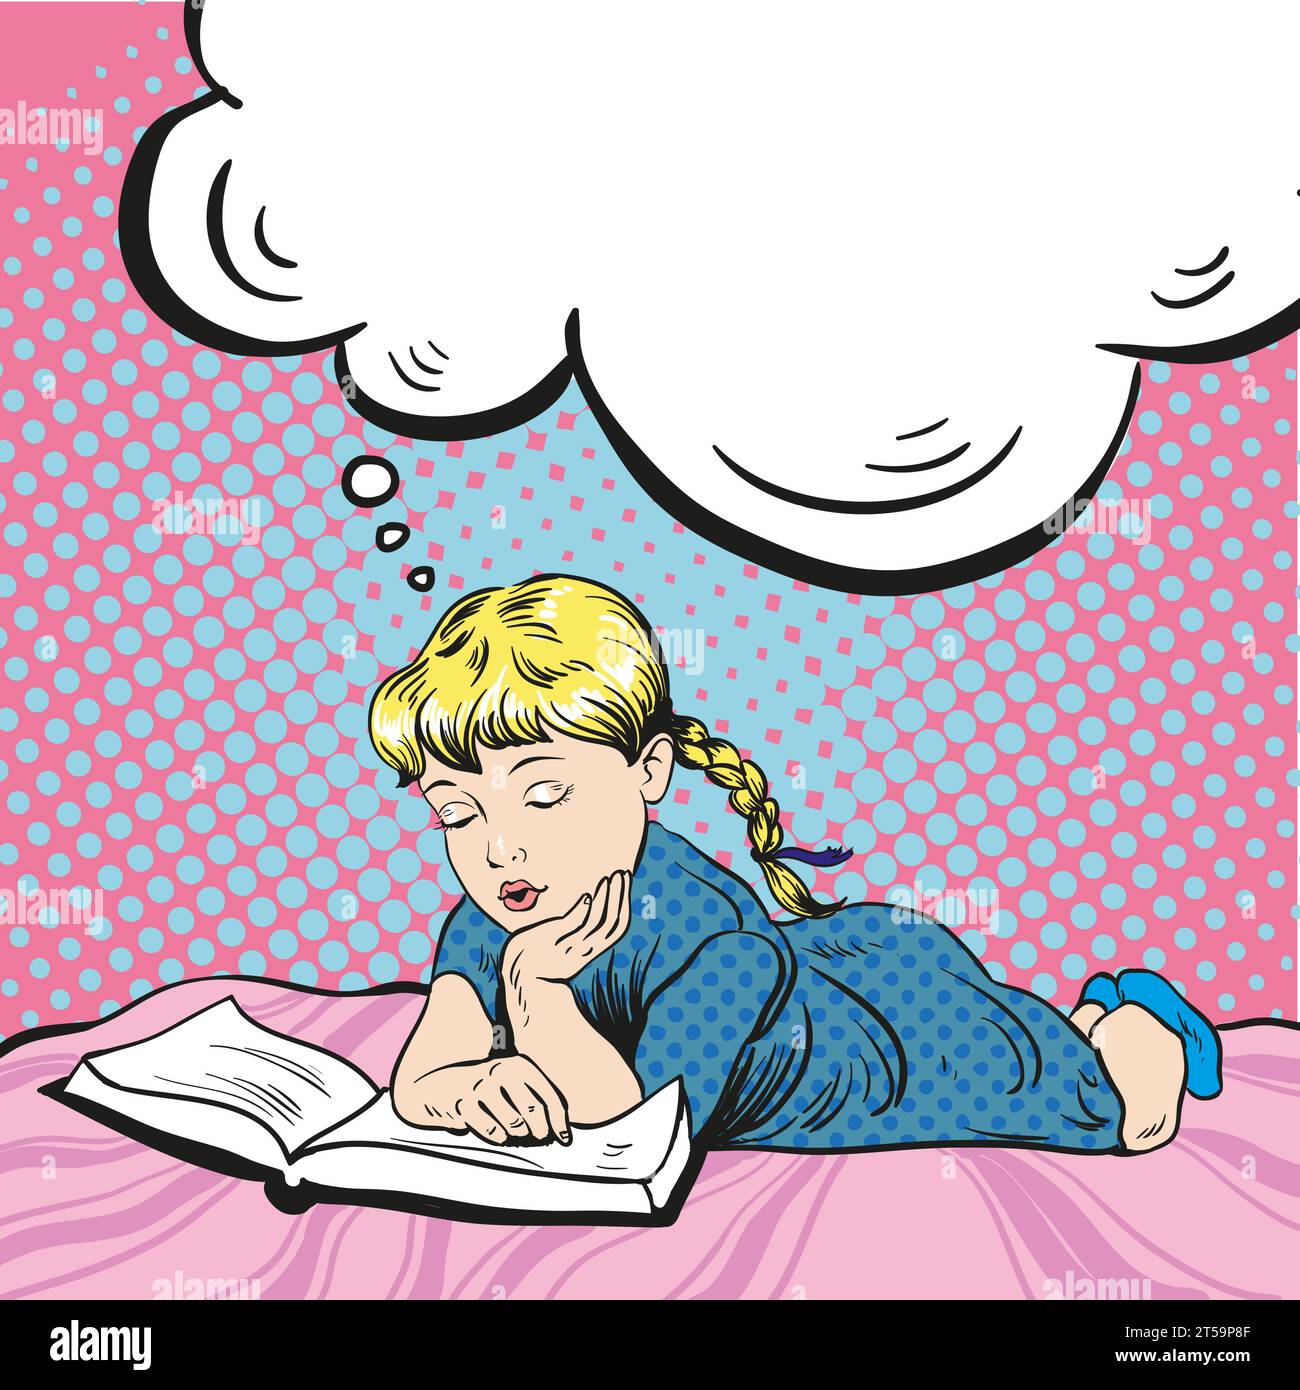 Little girl reading book on a bed. Vector illustration in comic pop art style. Girl dreaming about something reading tale. Stock Vector